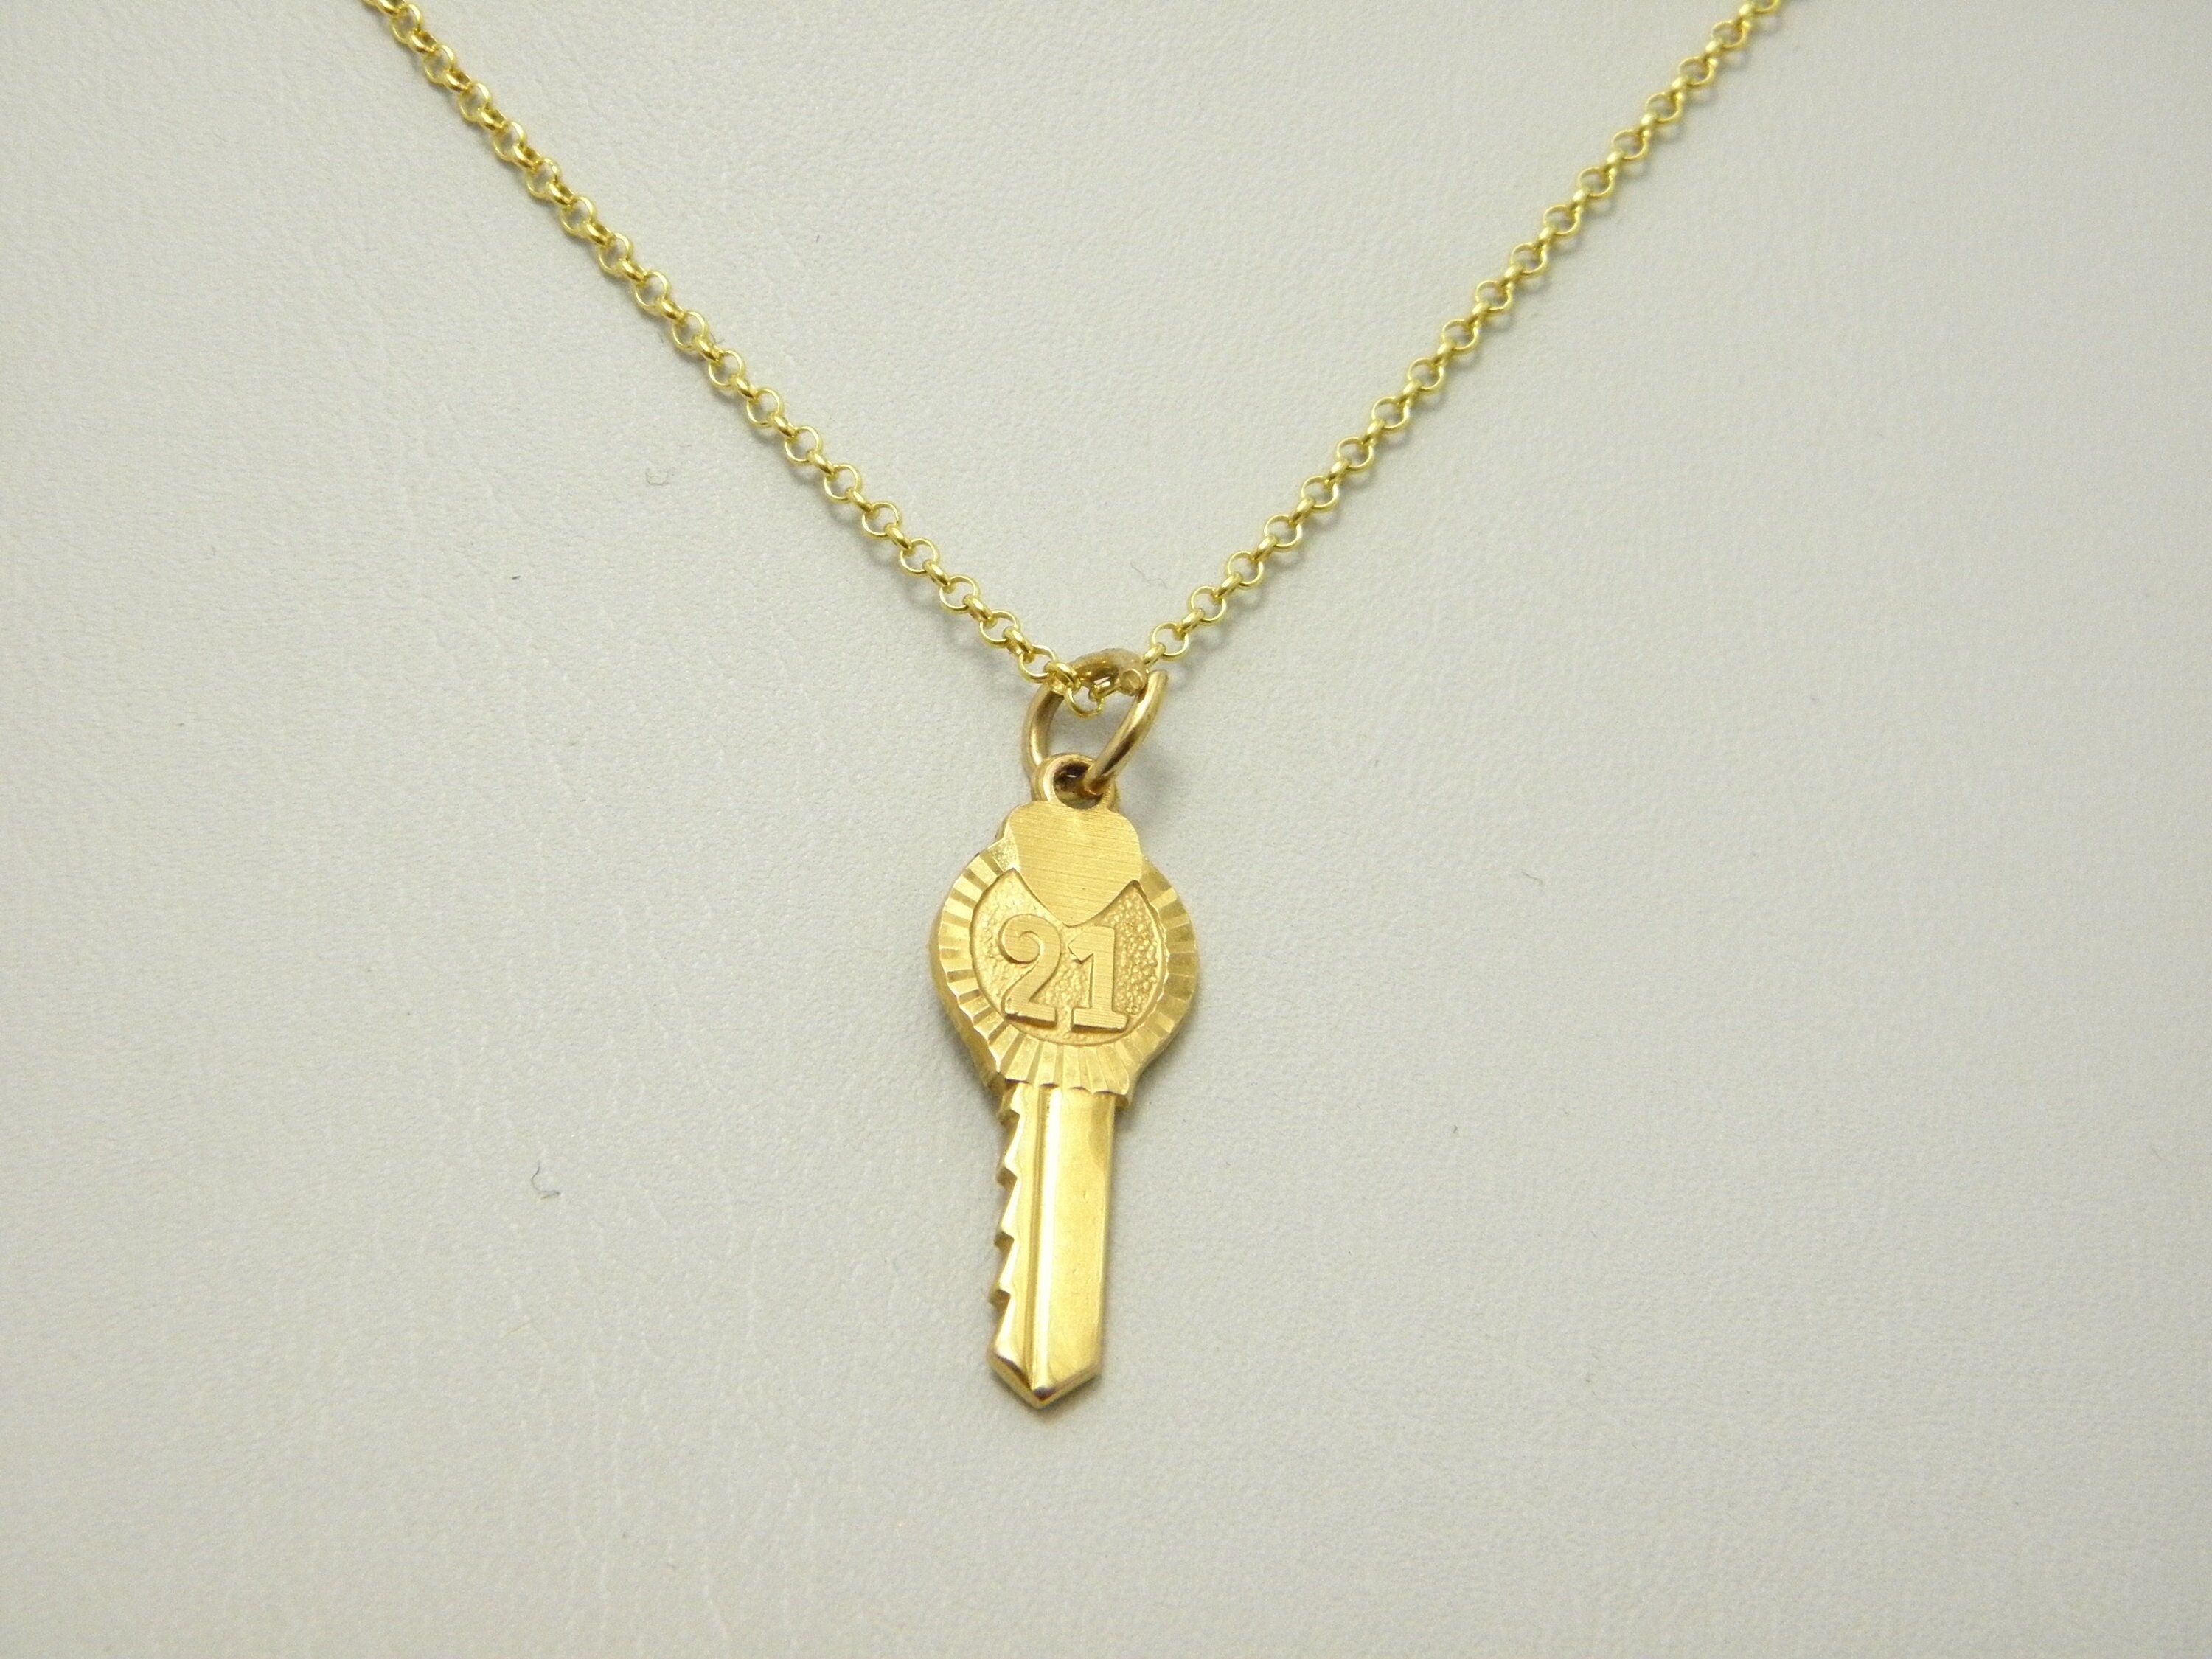  Jewelry Affairs 14k Yellow Real Gold Lock And Key